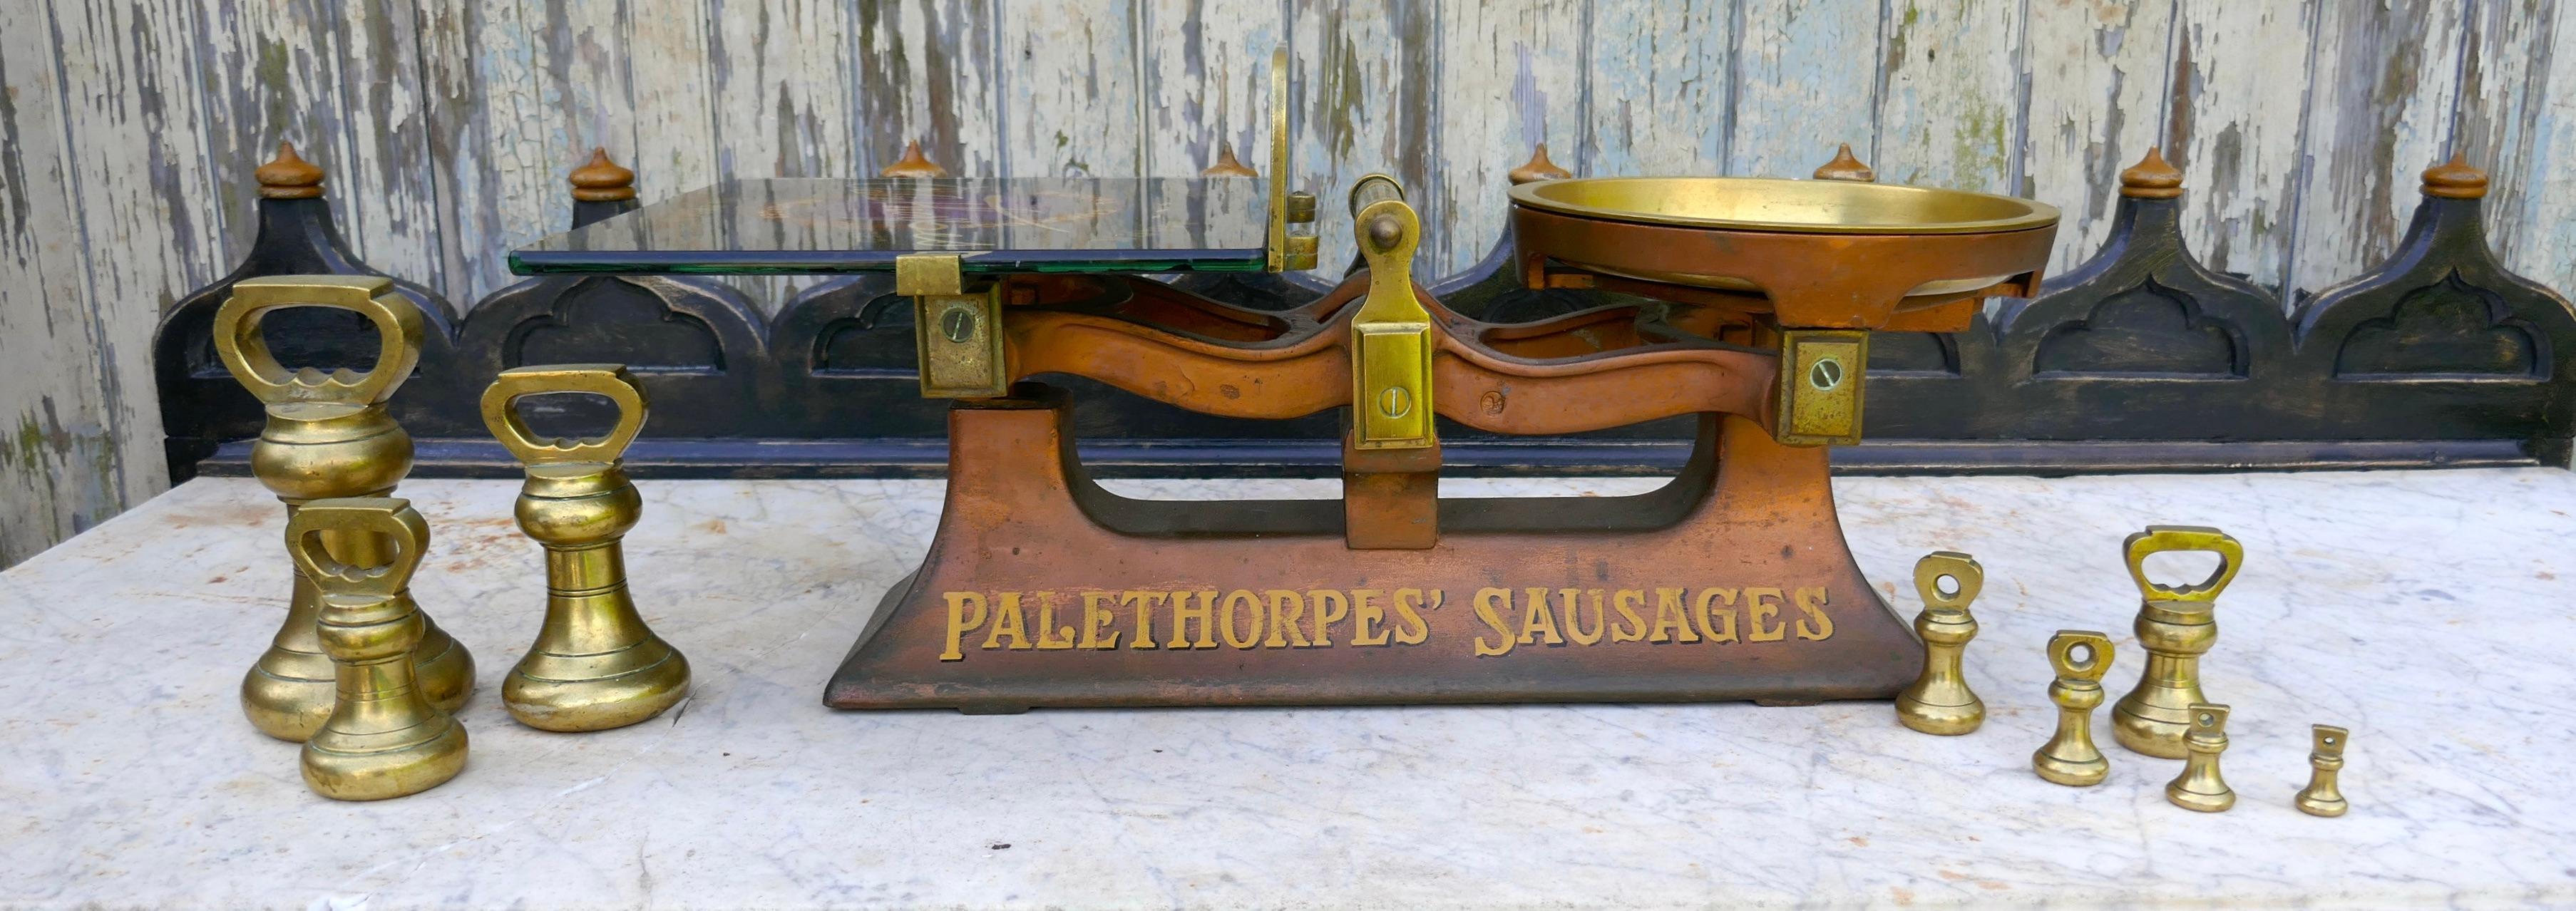 Butchers Balance Scales, Advertising Palethorpes’ Sausages    For Sale 1